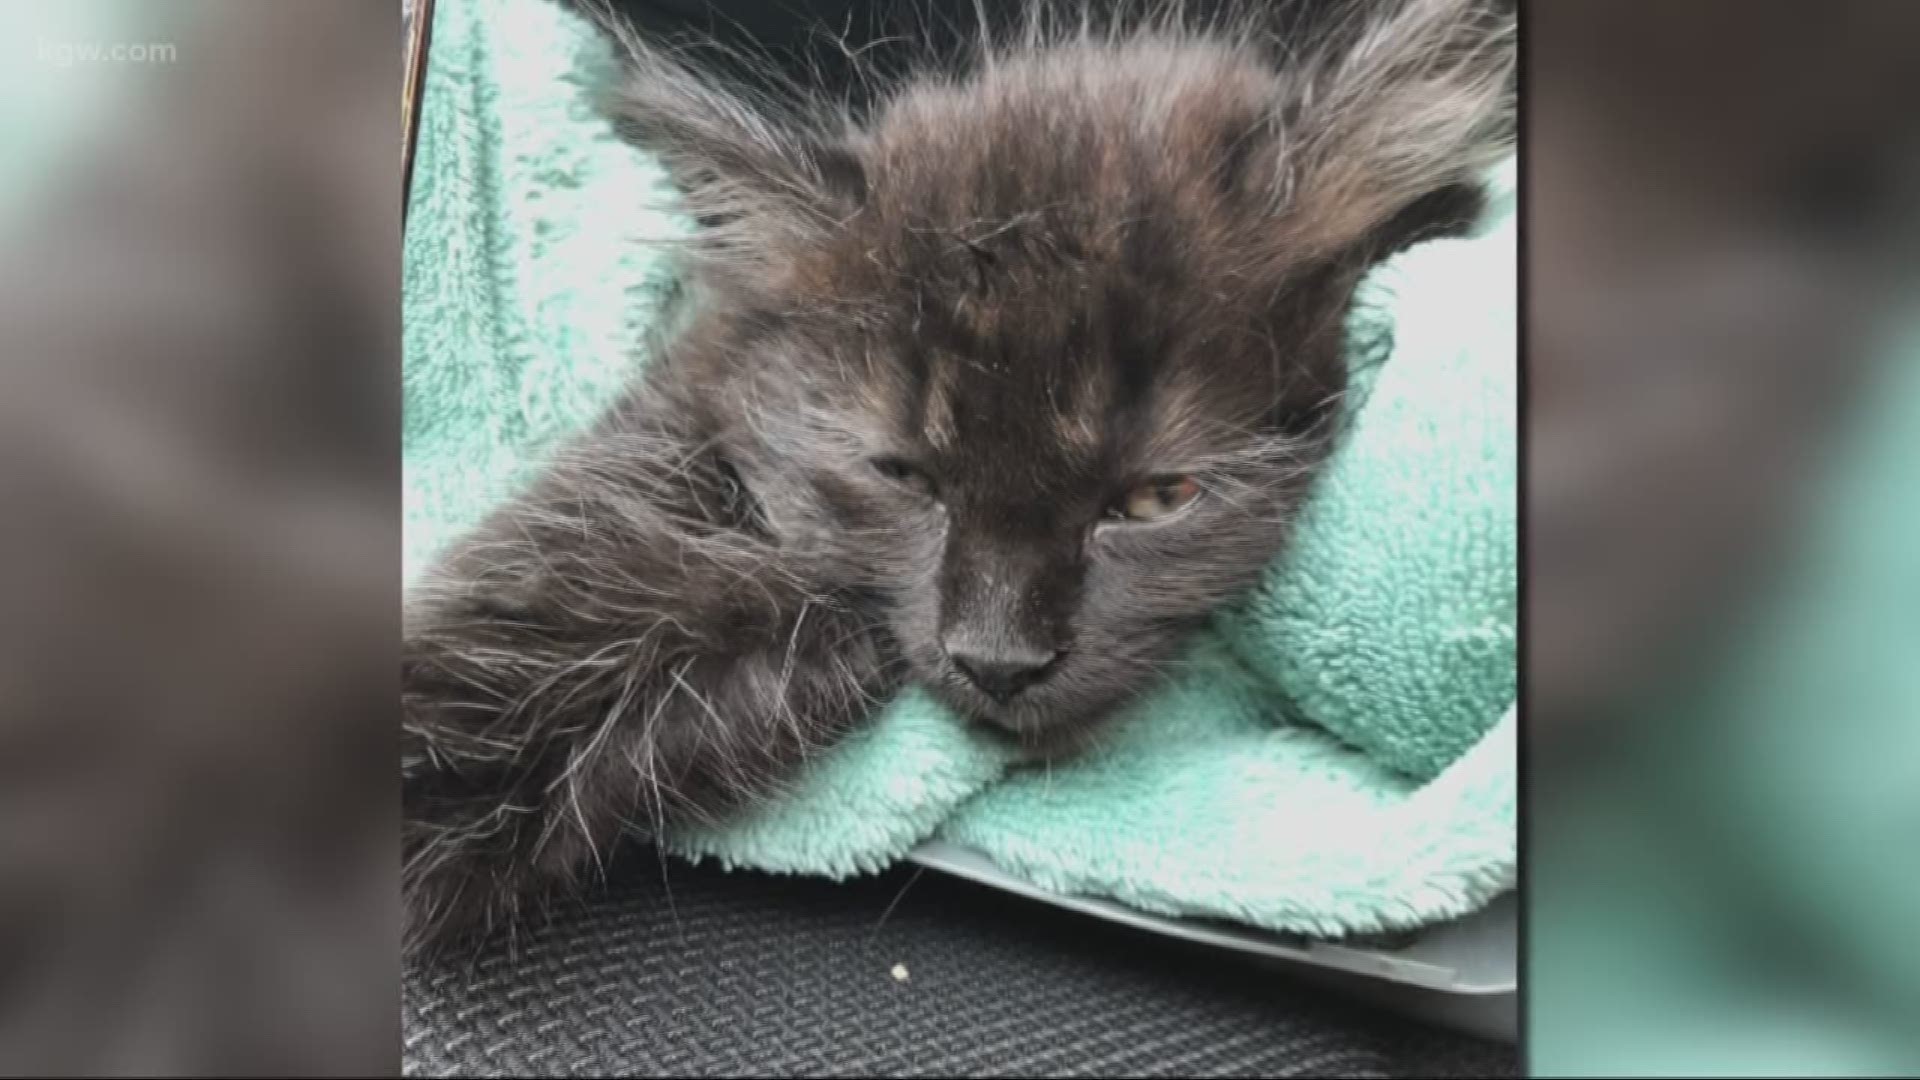 An animal thrown from a car. A woman says she saw a kitten tossed from a car window.